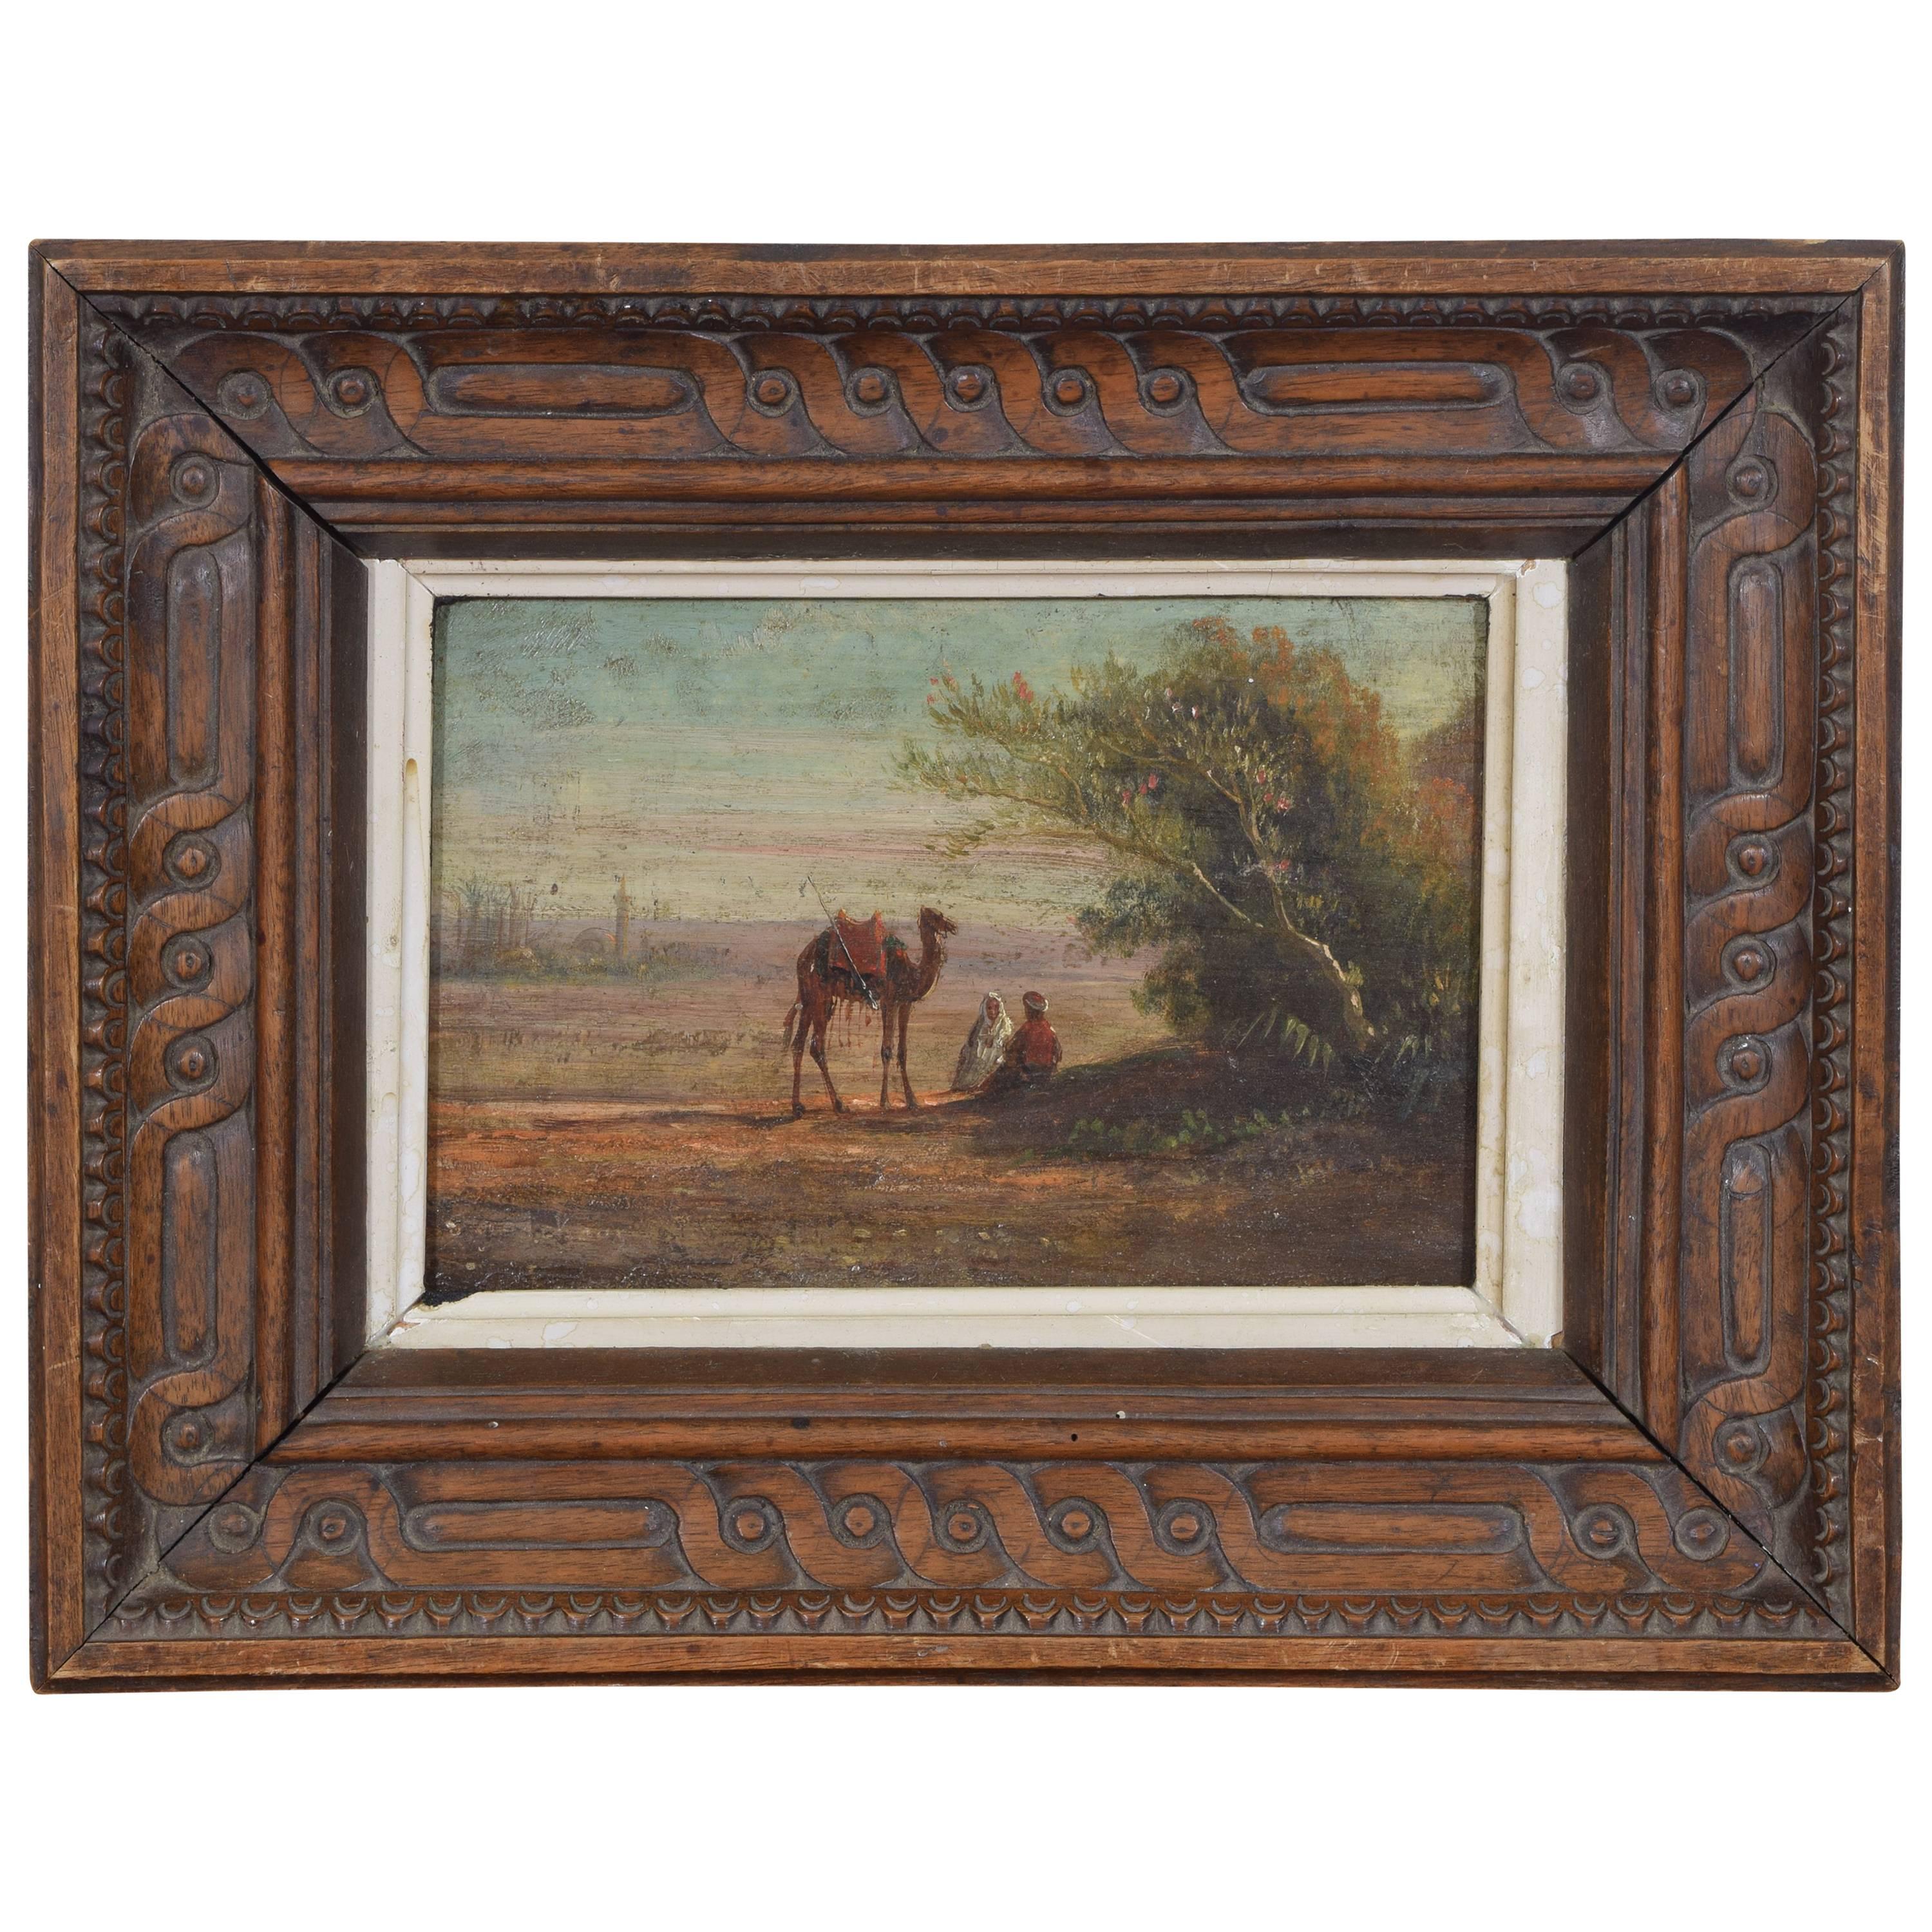 Oil on Wooden Panel in the Orientalist Style, Carved Wooden Frame